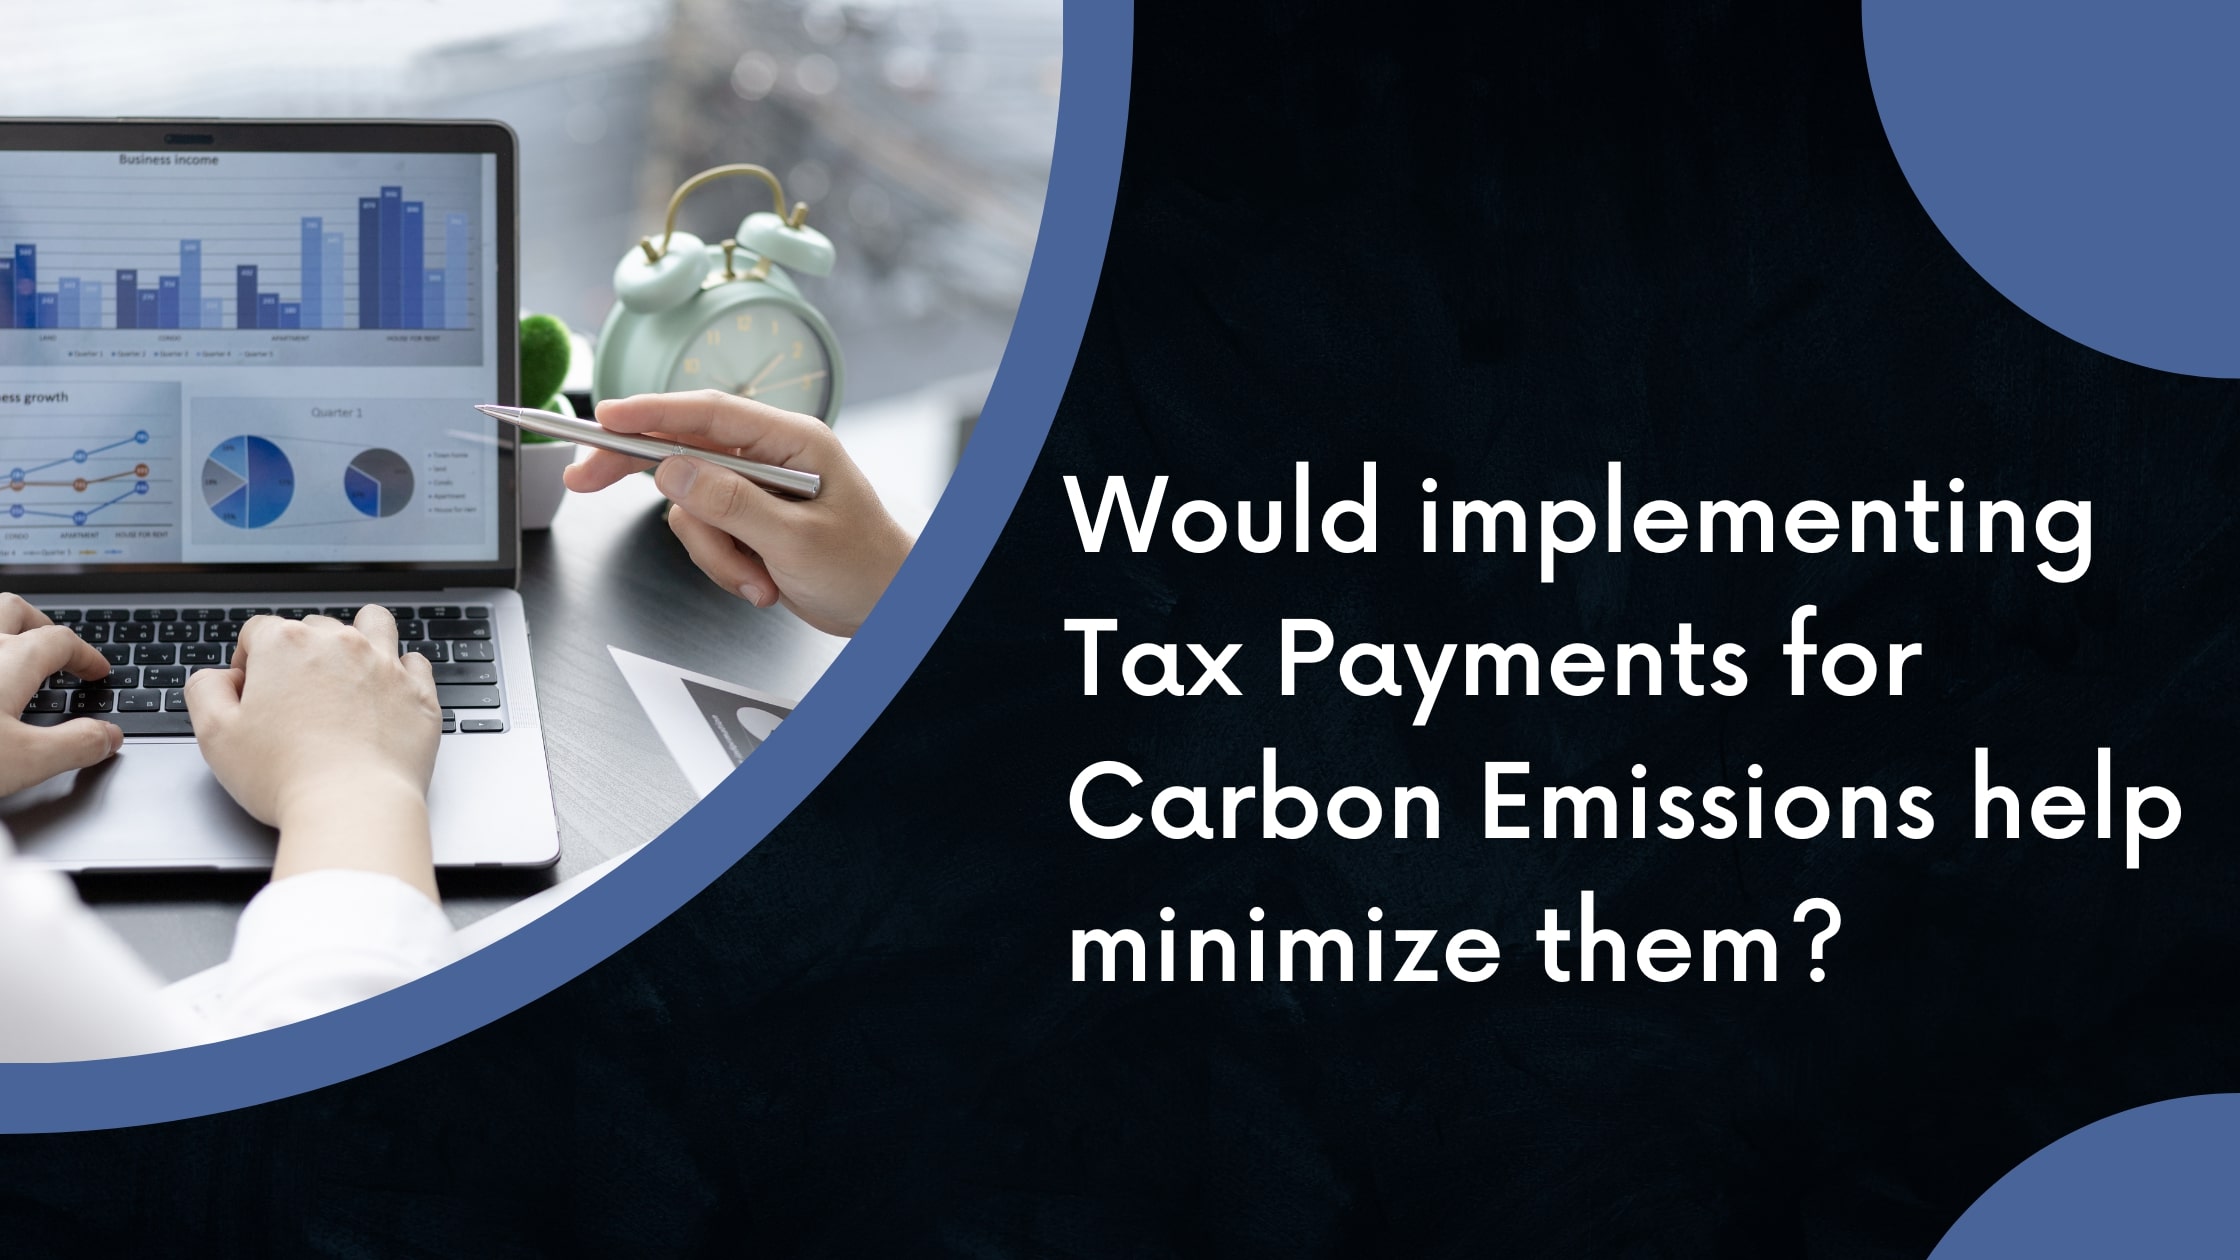 Would implementing Tax Payments for Carbon Emissions help minimize them